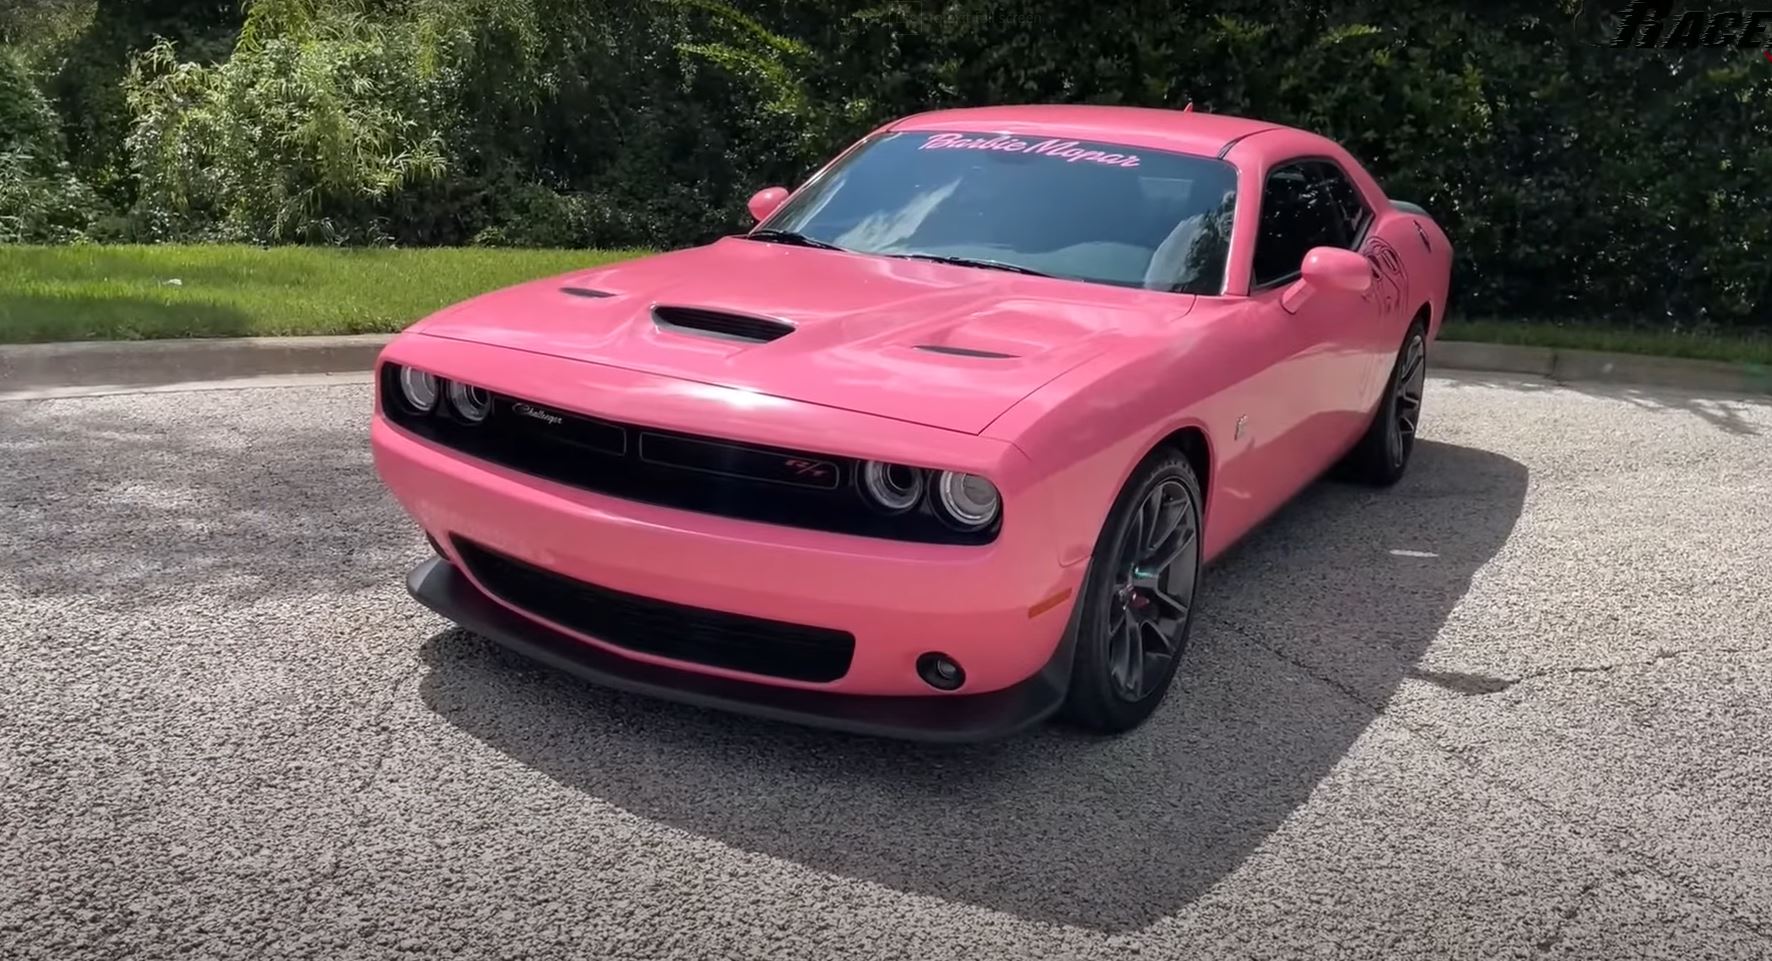 The Barbie Spec Turned This Dodge Challenger Scat Pack Into a